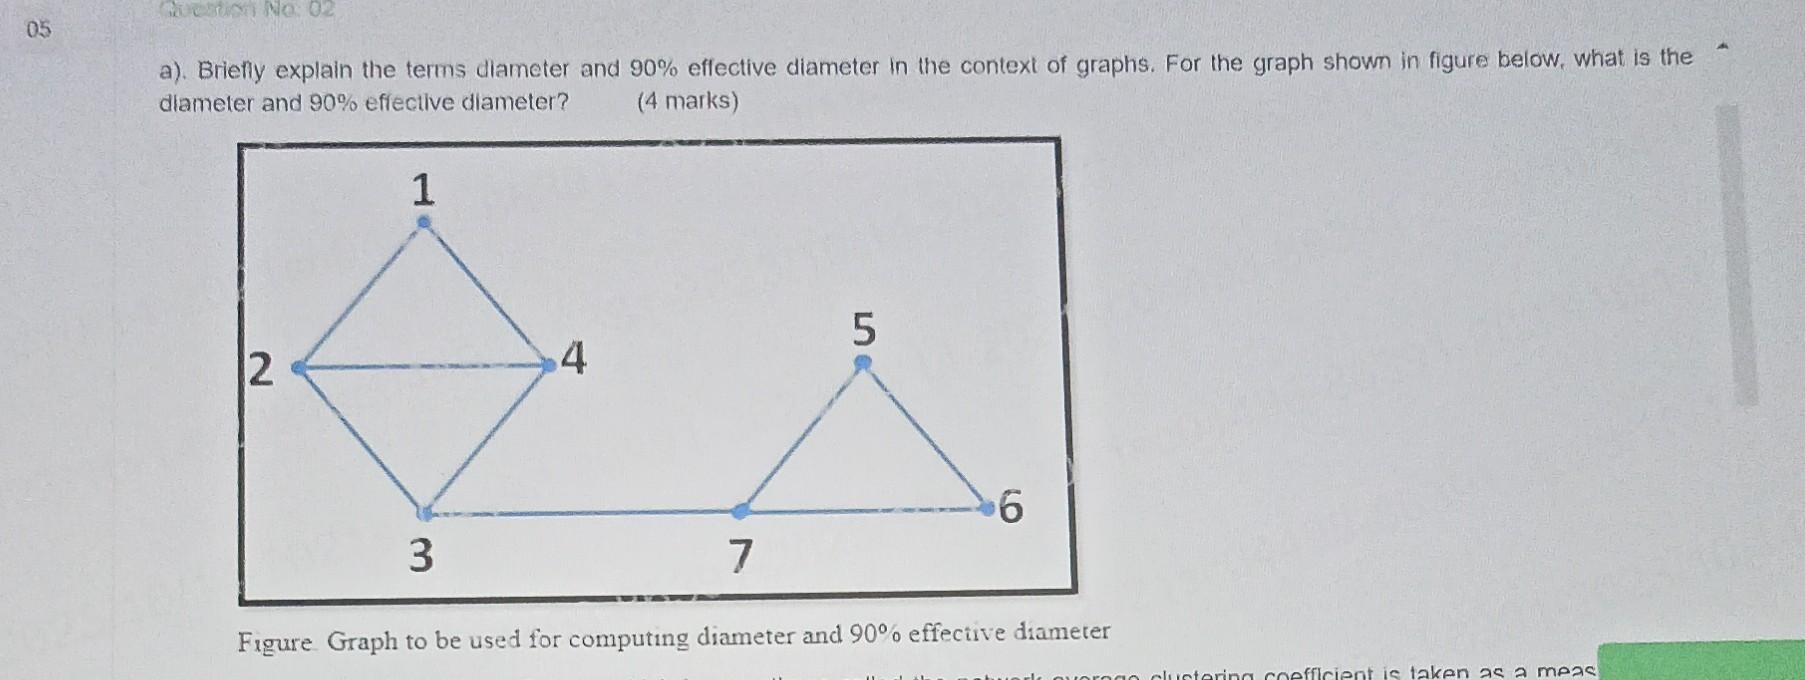 05 Guesion No: 02 a). Briefly explain the terms diameter and 90% effective diameter in the context of graphs.